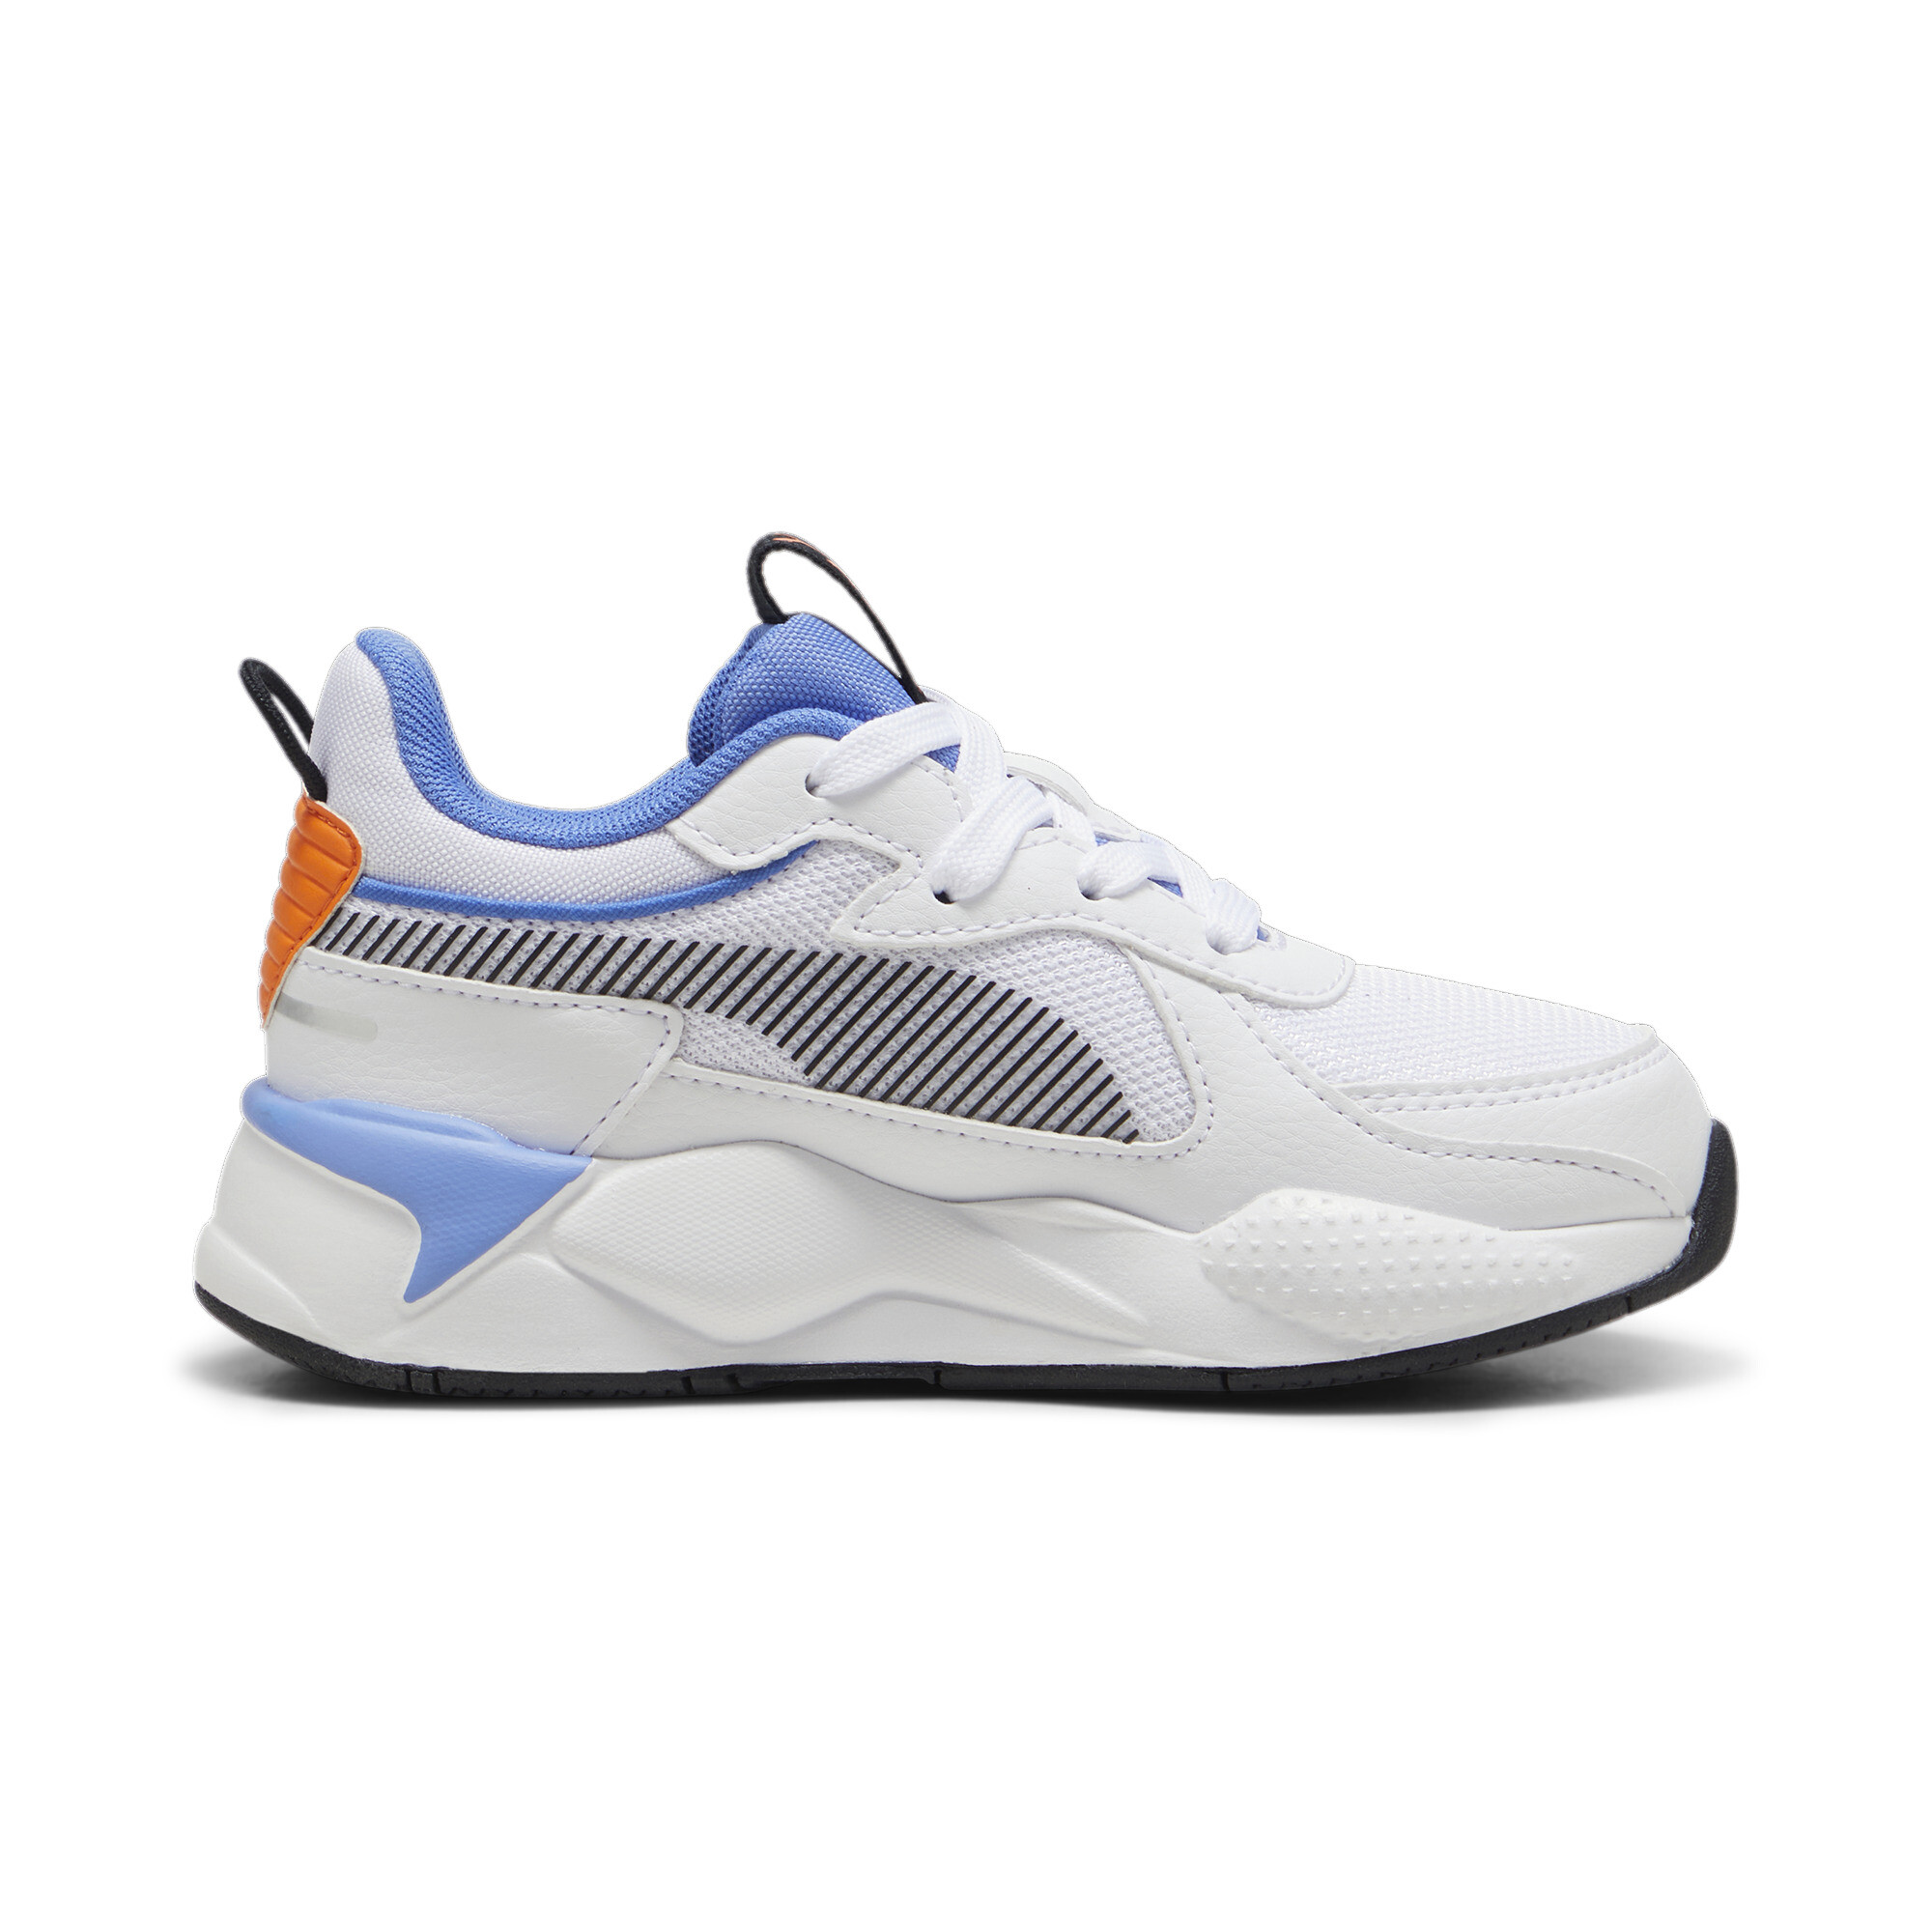 Puma RS-X Kids' Sneakers, White, Size 30, Shoes